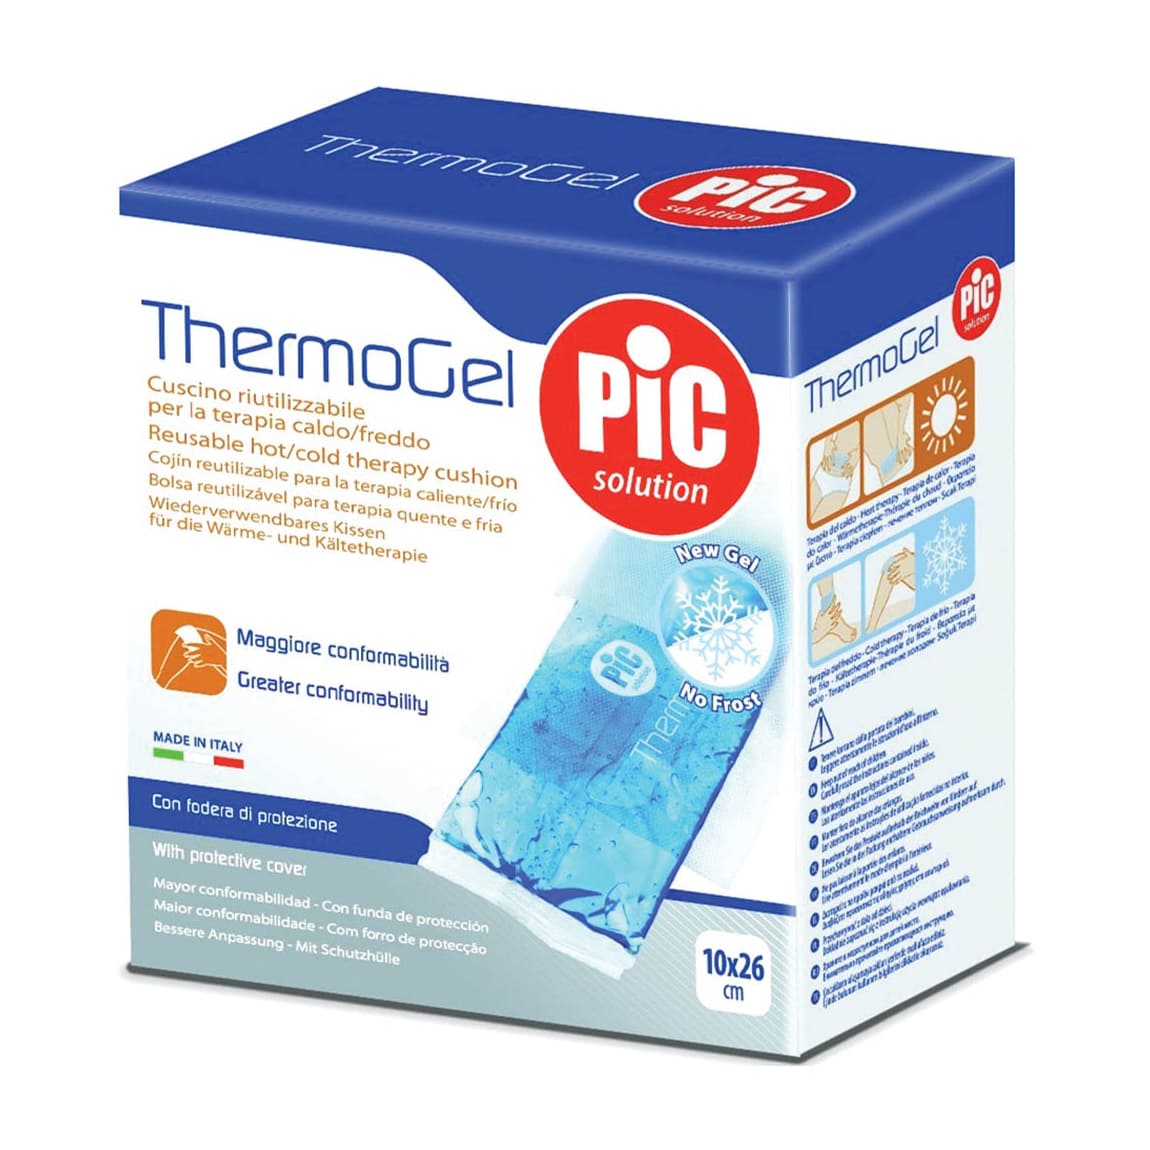 Pic Thermogel Reusable Cold-Hot Gel Cushion - Bloom Pharmacy